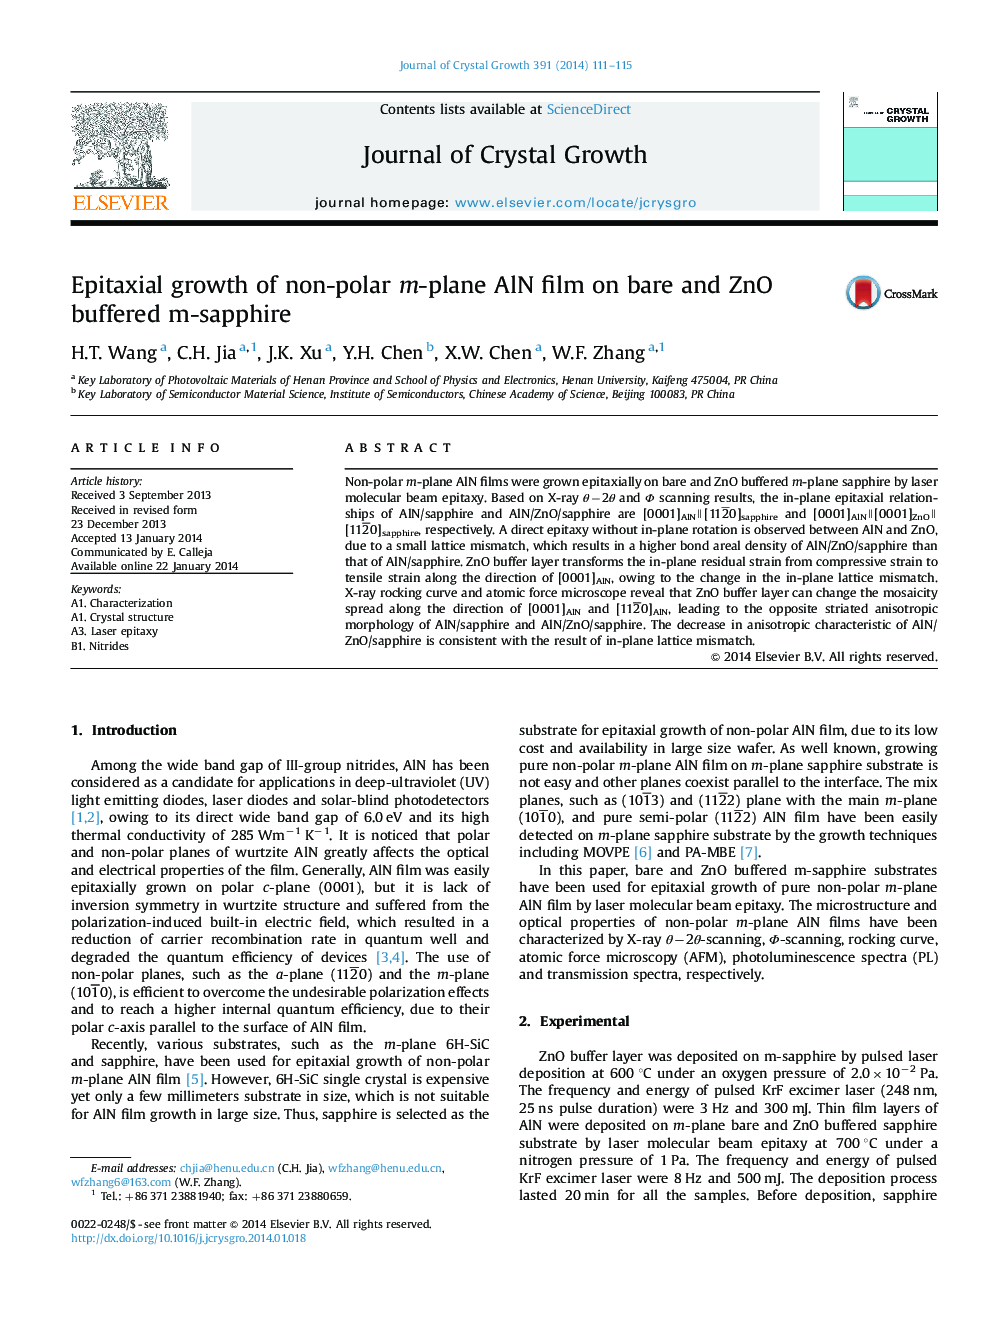 Epitaxial growth of non-polar m-plane AlN film on bare and ZnO buffered m-sapphire